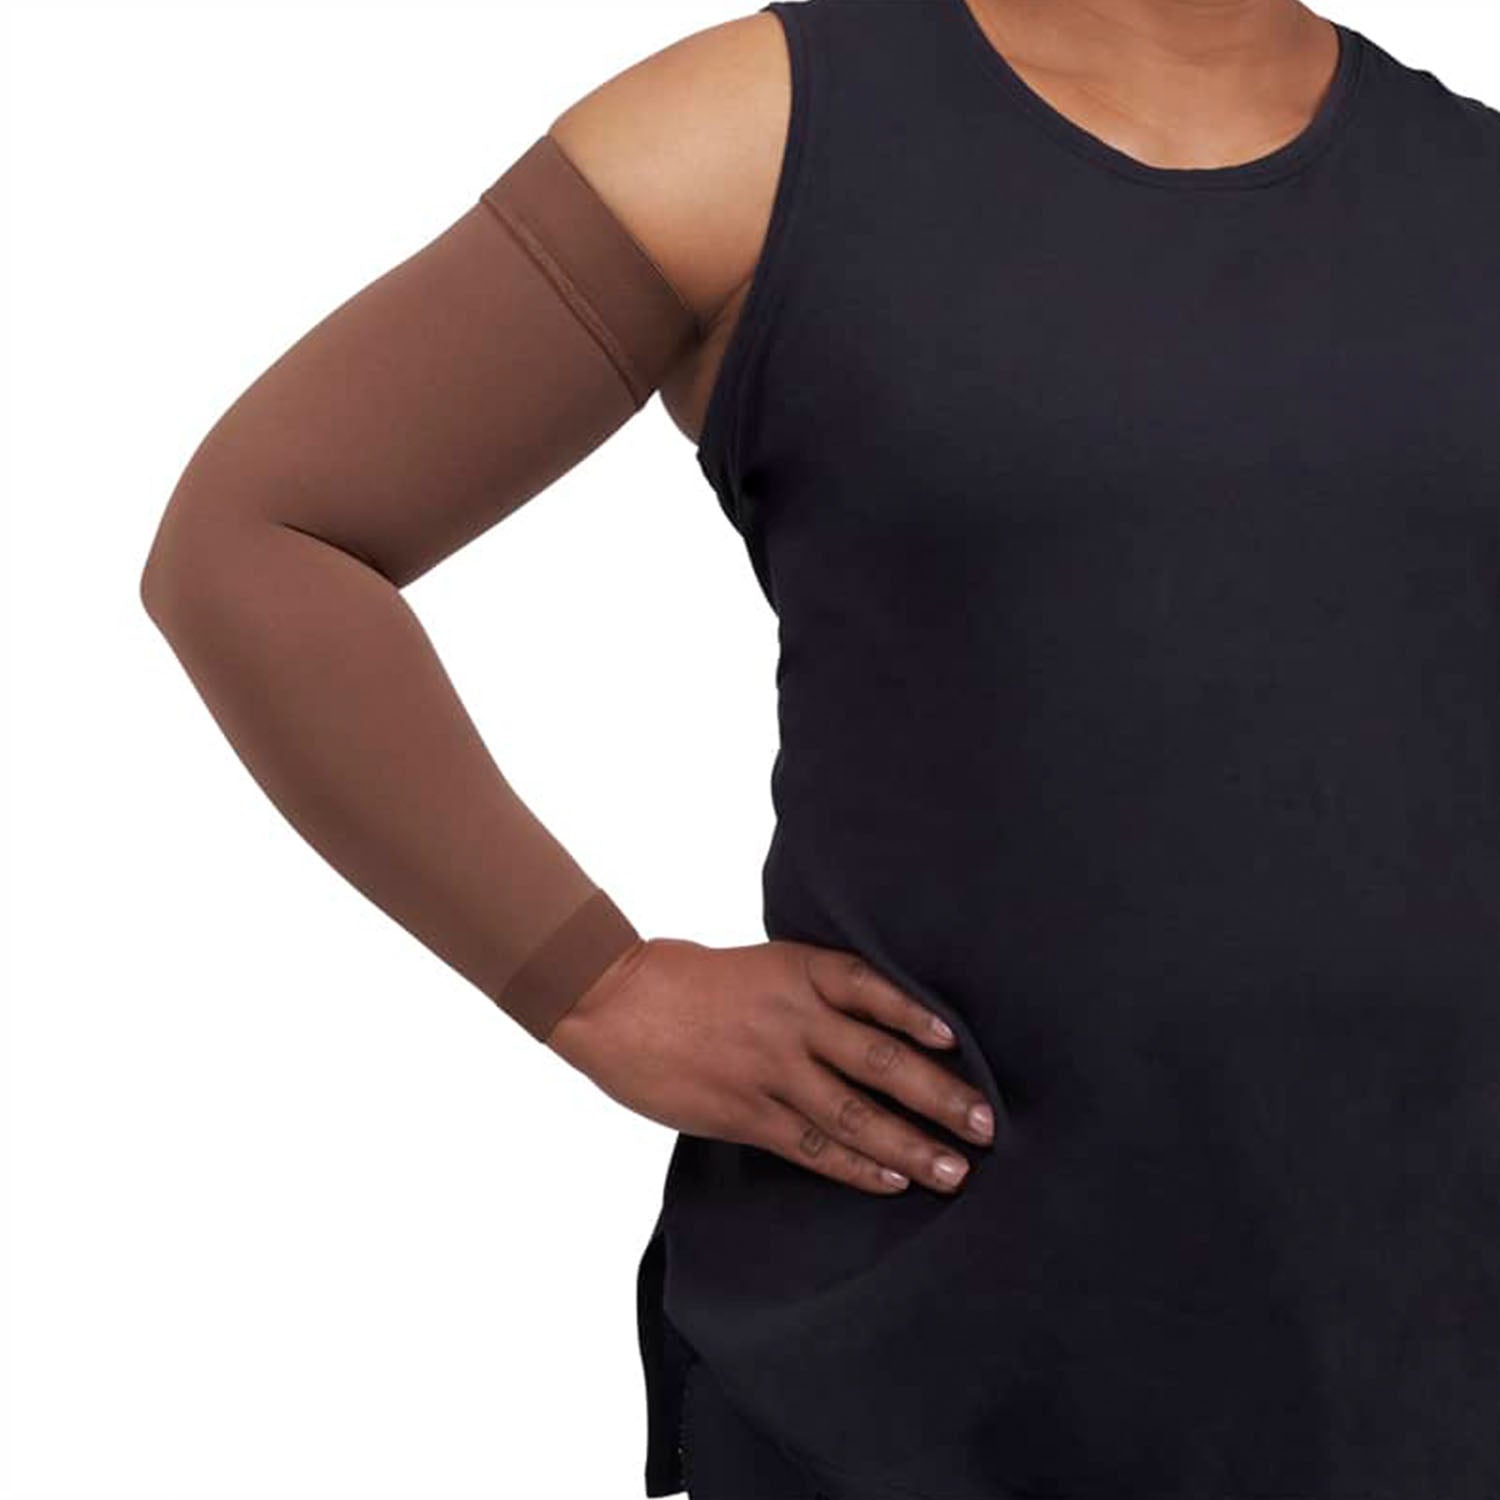 Mediven Comfort Lymphedema Armsleeve - 15-20 mmHg (Extra Wide